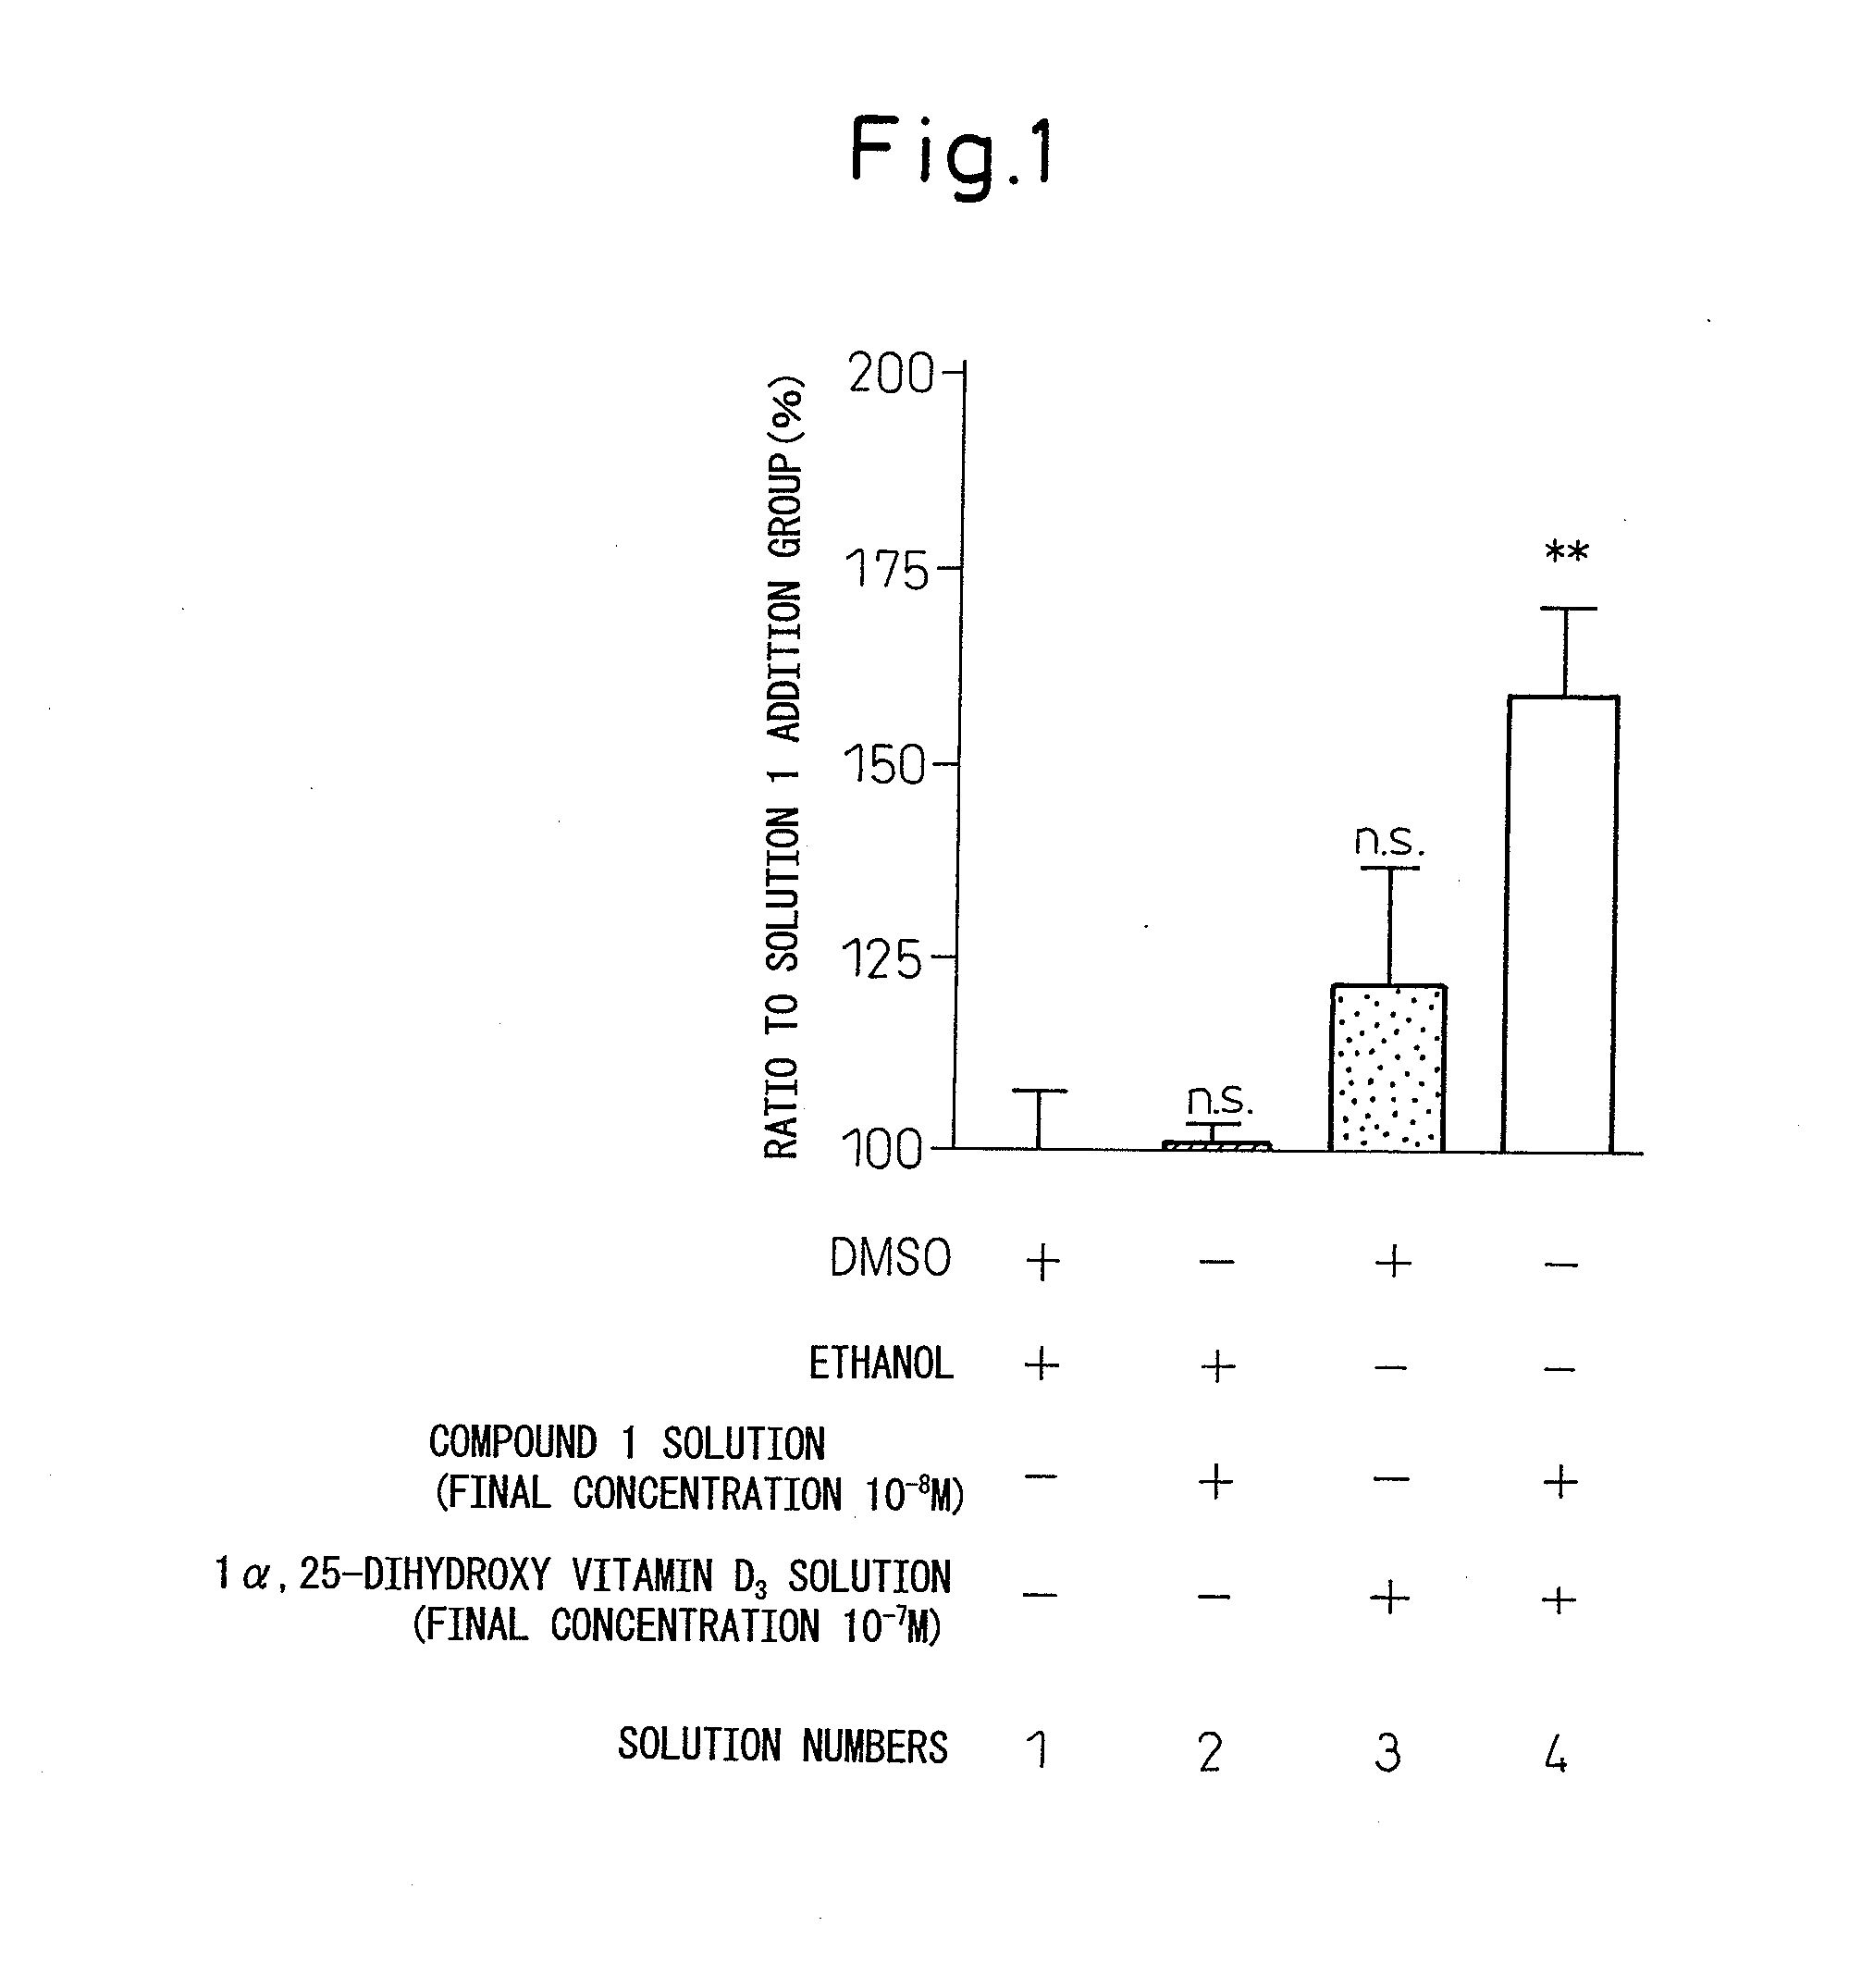 Prophylactic agent or therapeutic agent for disease resulting from abnormal bone metabolism